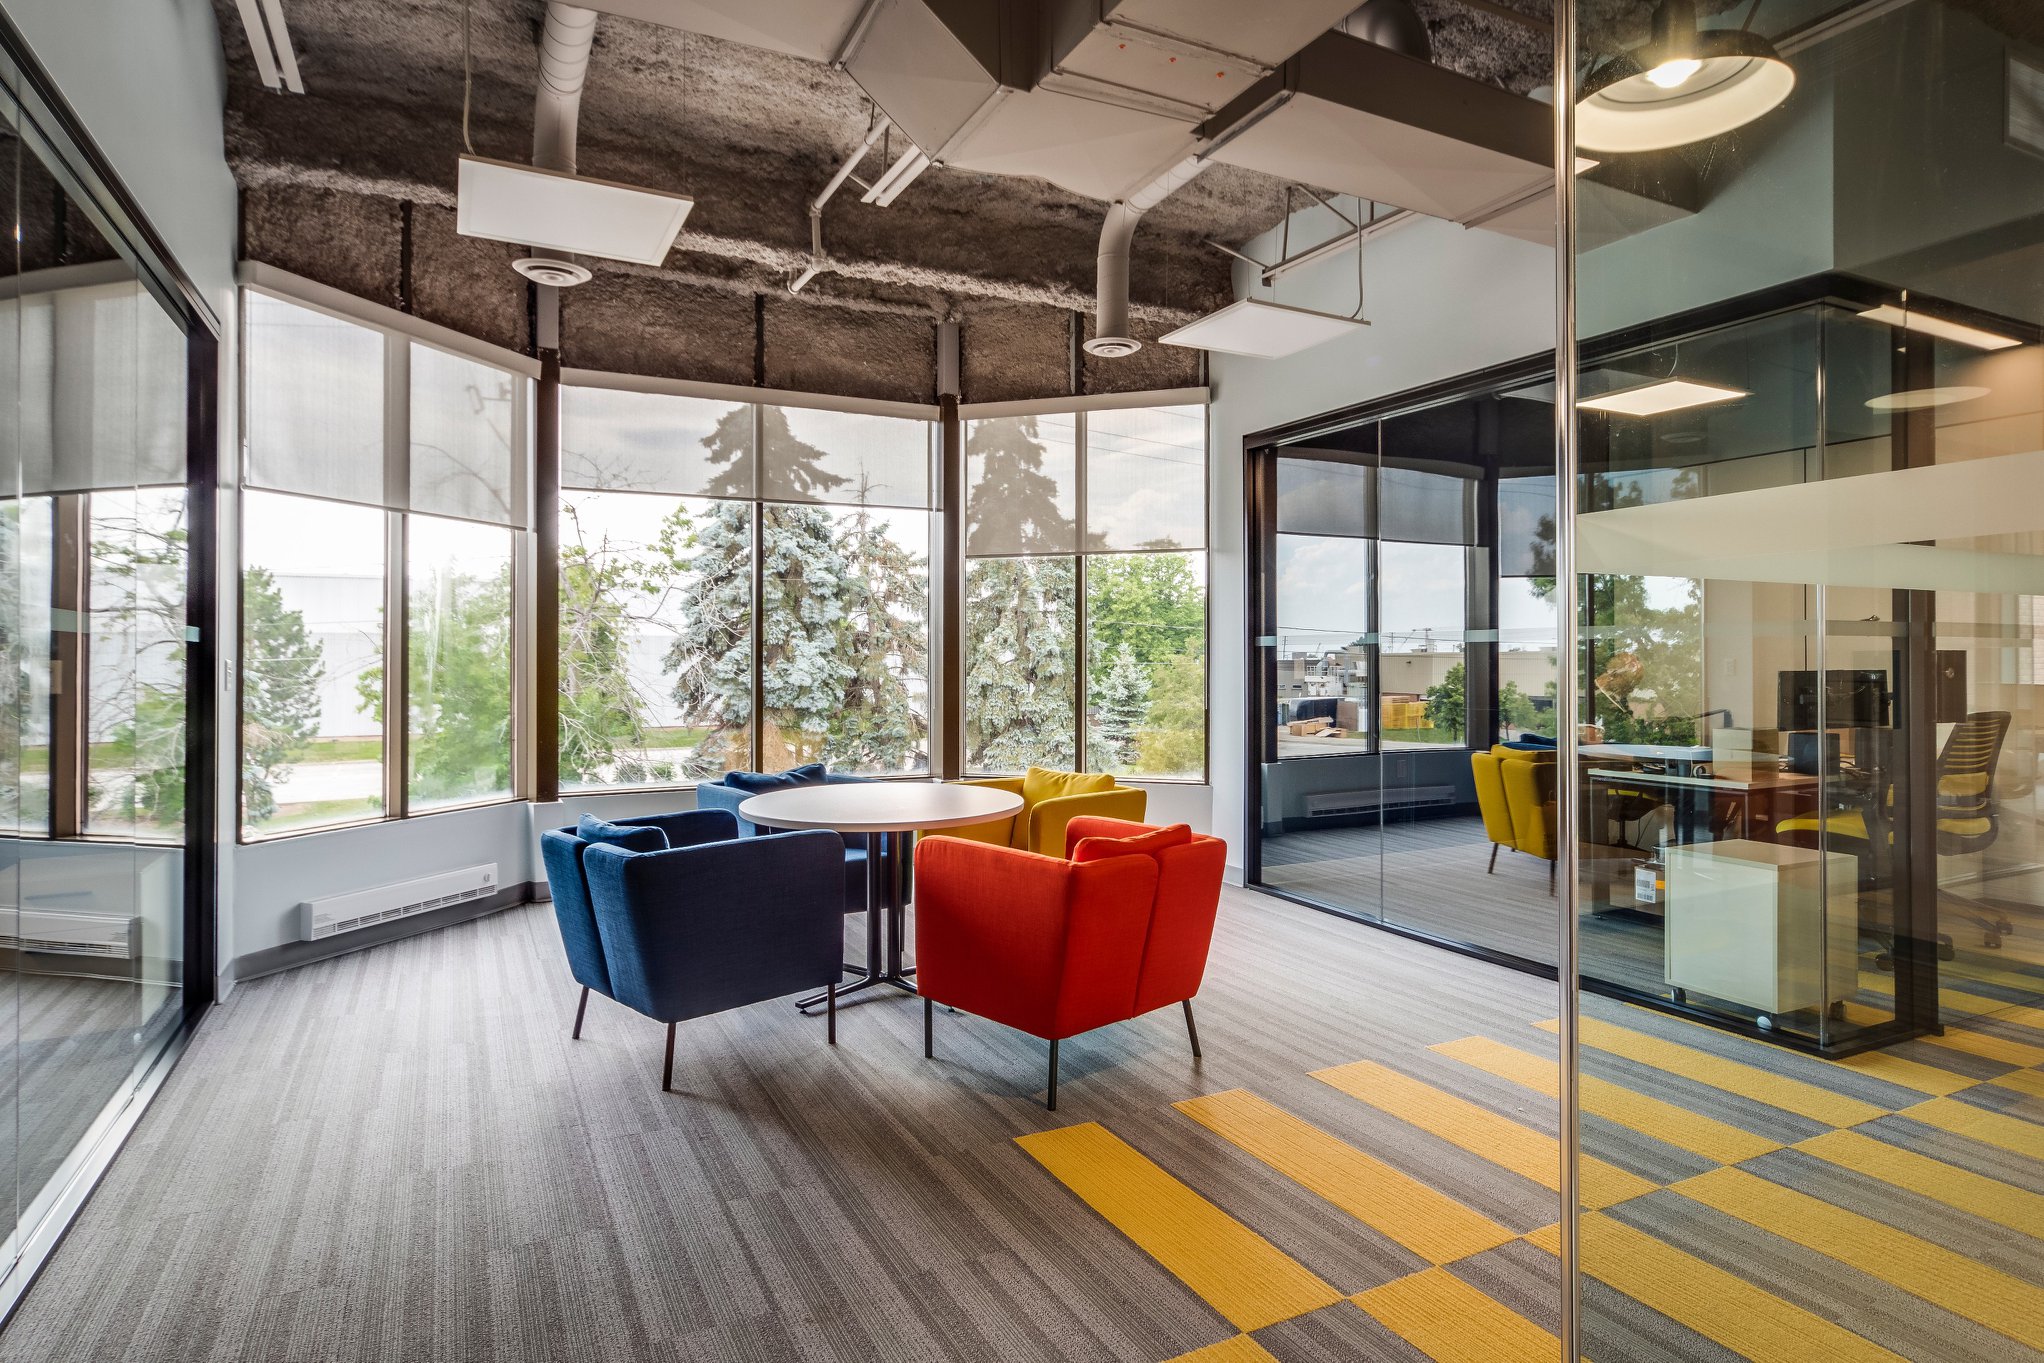 Serviced Offices vs. Coworking Spaces: Now You Can Have Both